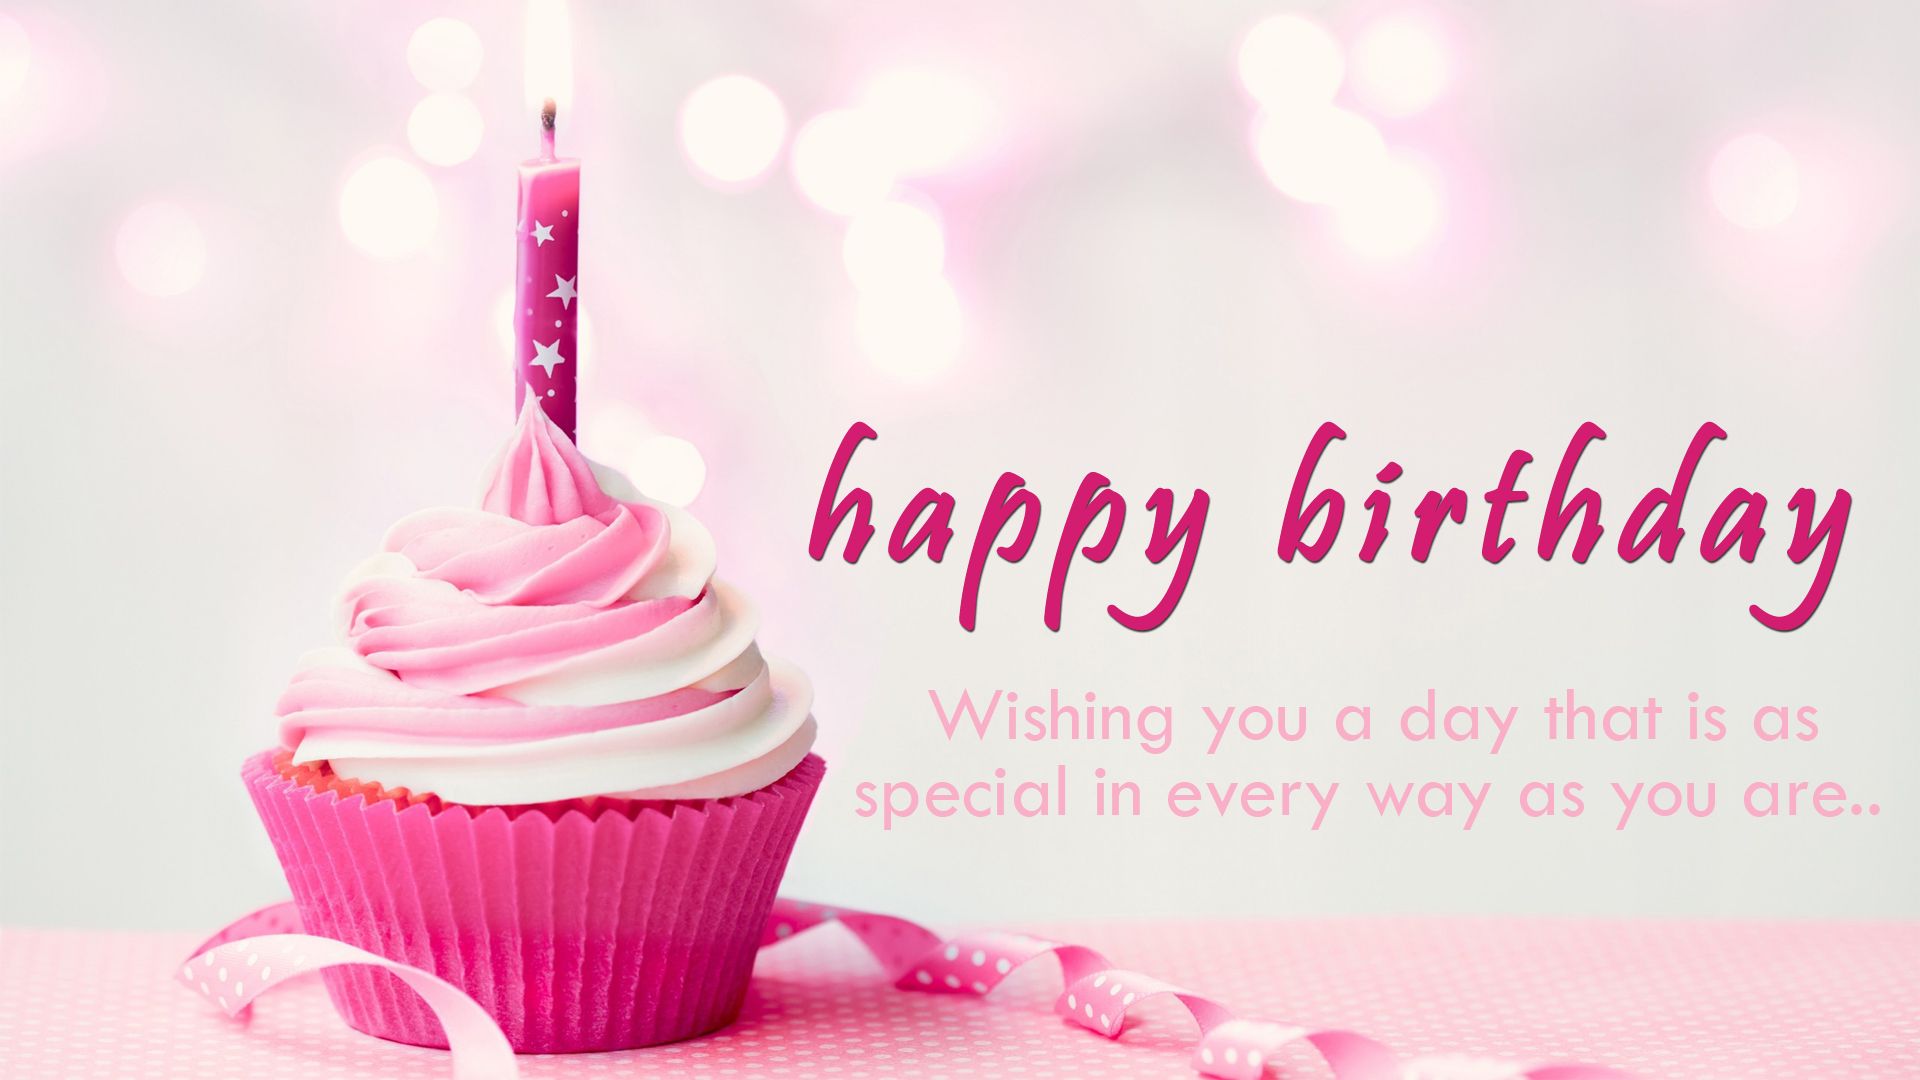 Happy Birthday Wishes Greeting HD Wallpaper Background